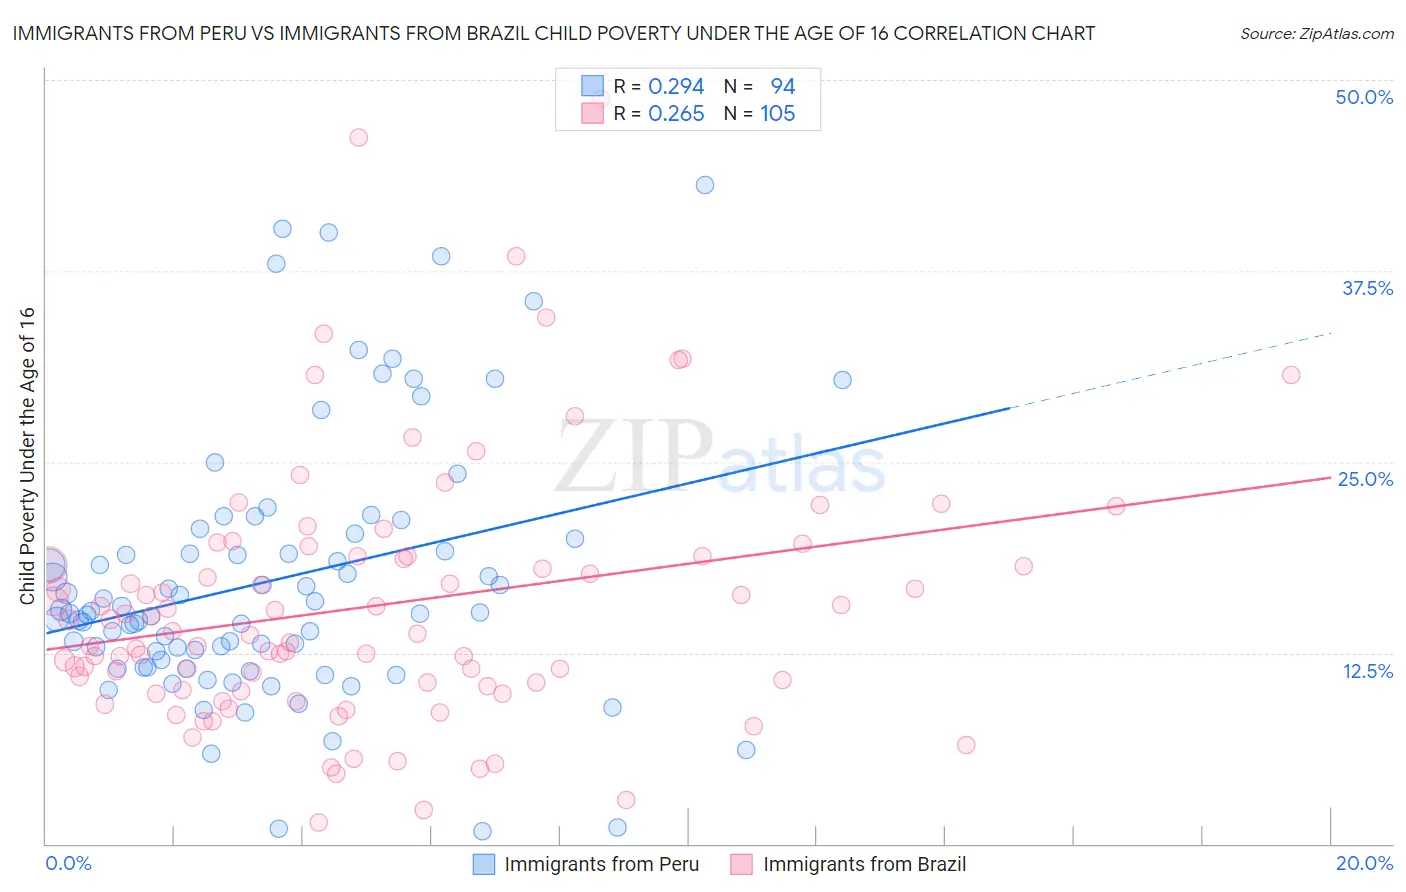 Immigrants from Peru vs Immigrants from Brazil Child Poverty Under the Age of 16